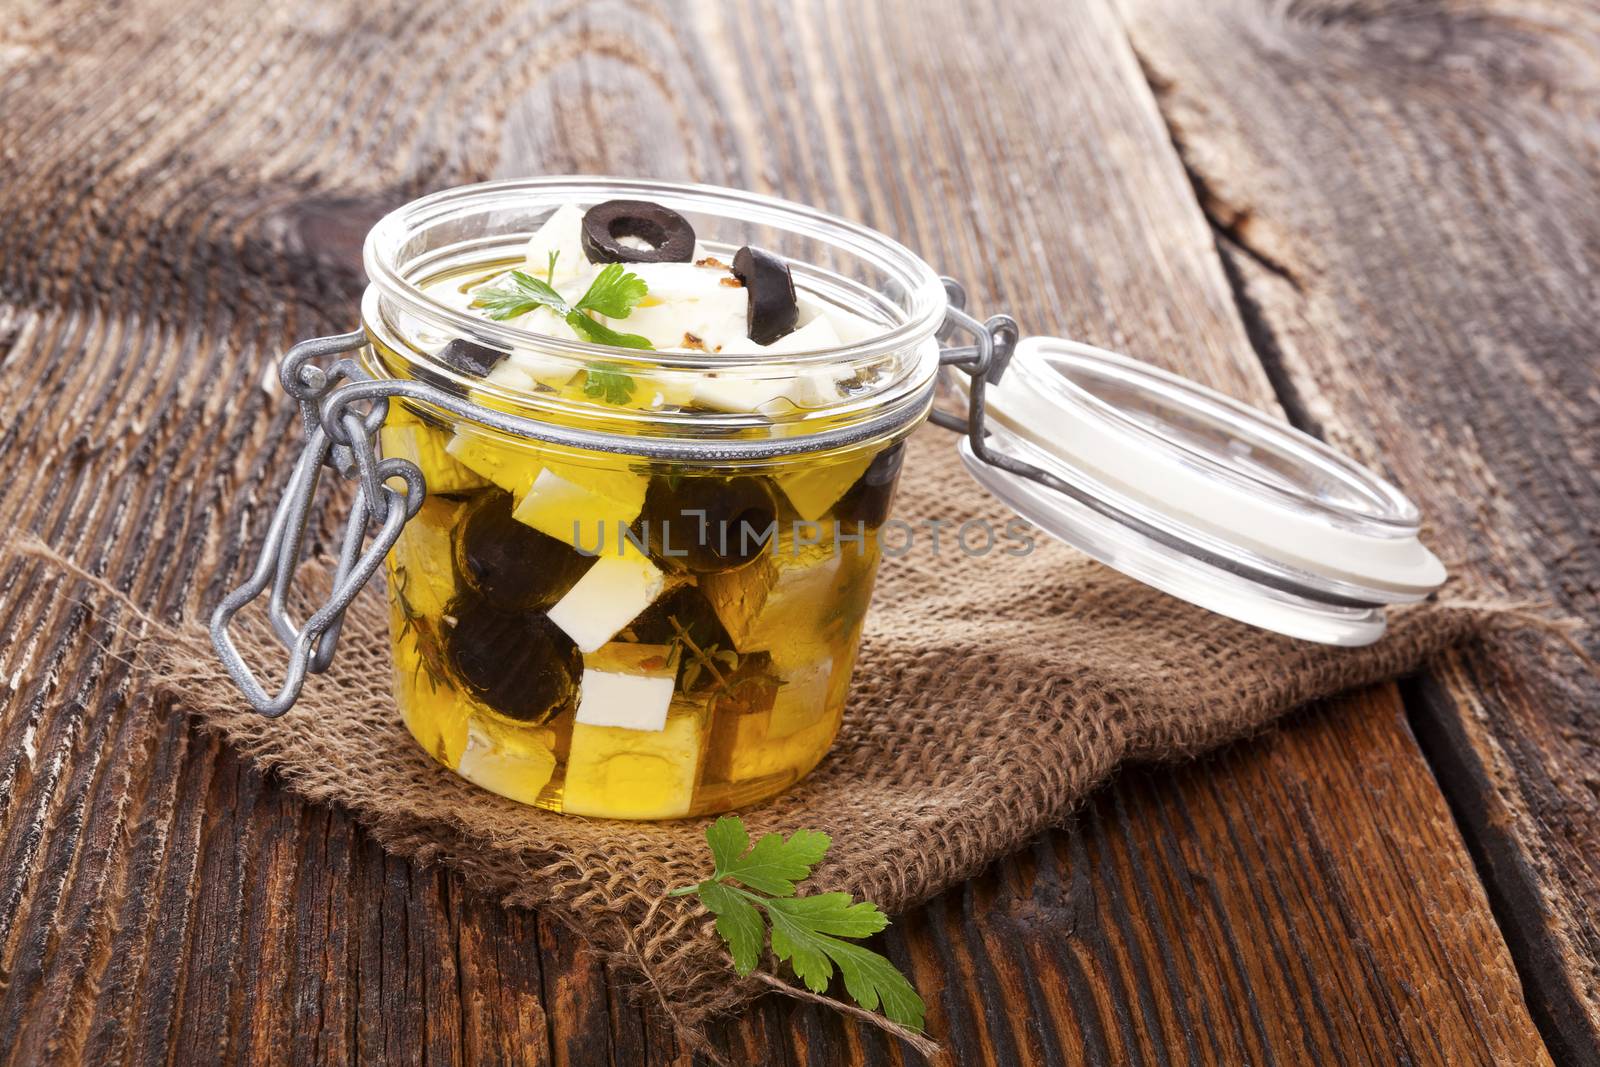 Marinated feta cheese in glass jar on brown wooden background. Culinary marinated cheese, rustic styles.